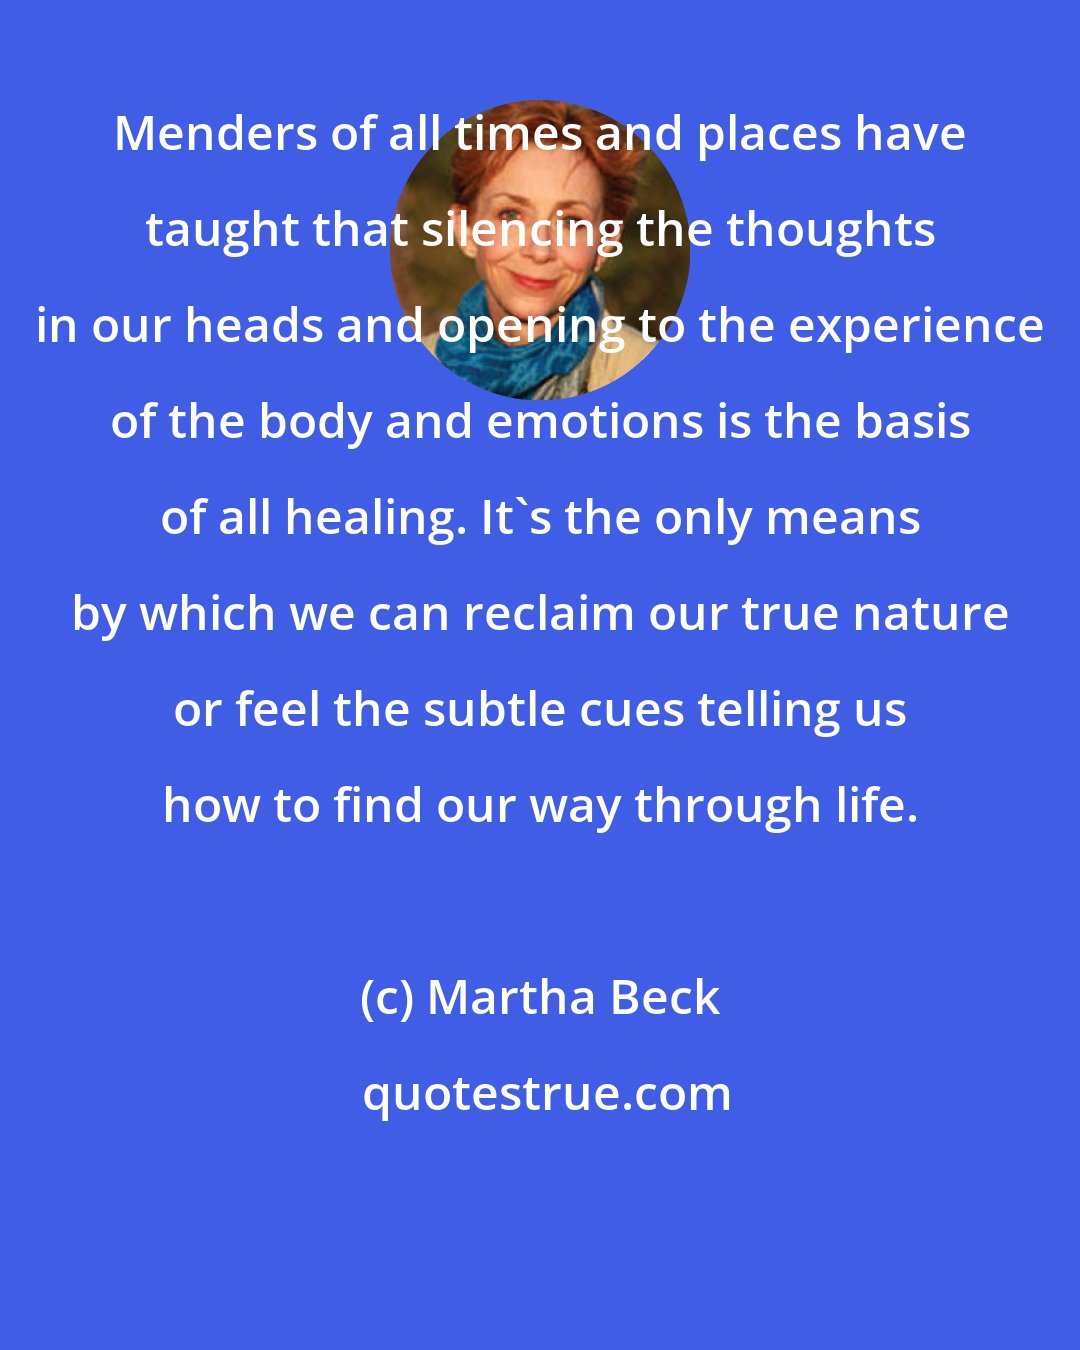 Martha Beck: Menders of all times and places have taught that silencing the thoughts in our heads and opening to the experience of the body and emotions is the basis of all healing. It's the only means by which we can reclaim our true nature or feel the subtle cues telling us how to find our way through life.